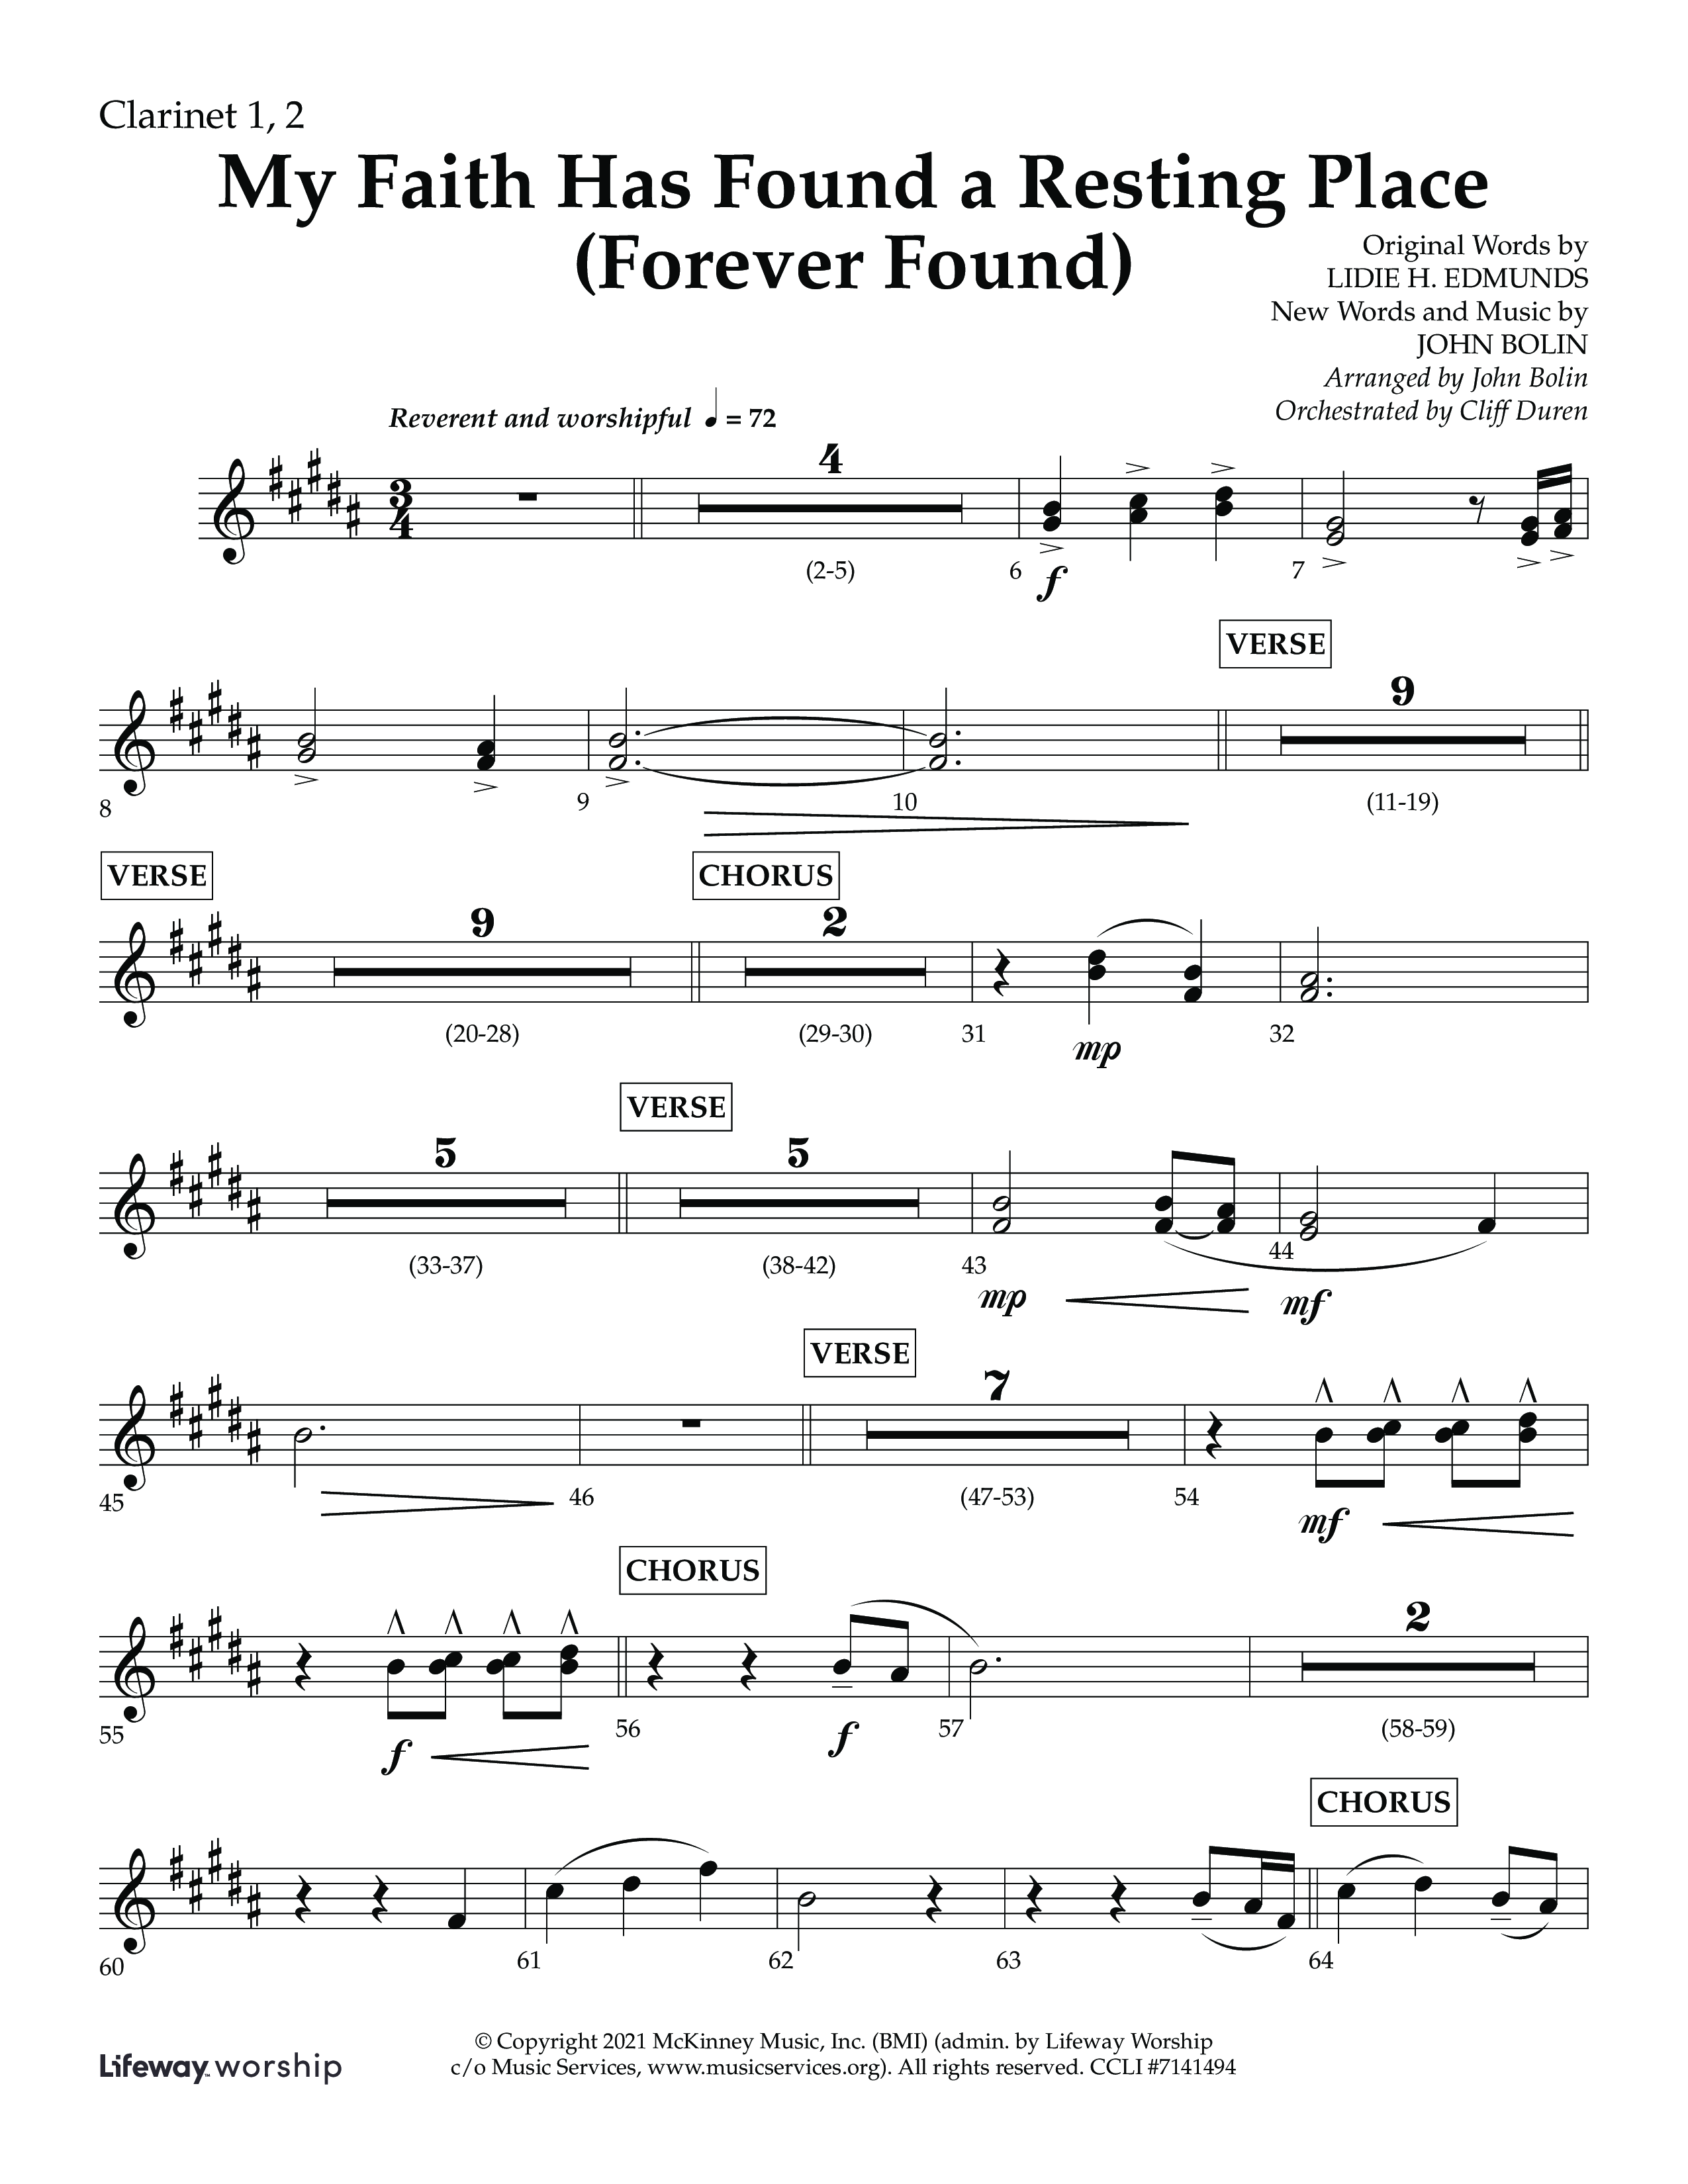 My Faith Has Found a Resting Place (Forever Found) (Choral Anthem SATB) Clarinet 1/2 (Lifeway Choral / Arr. John Bolin / Orch. Cliff Duren)